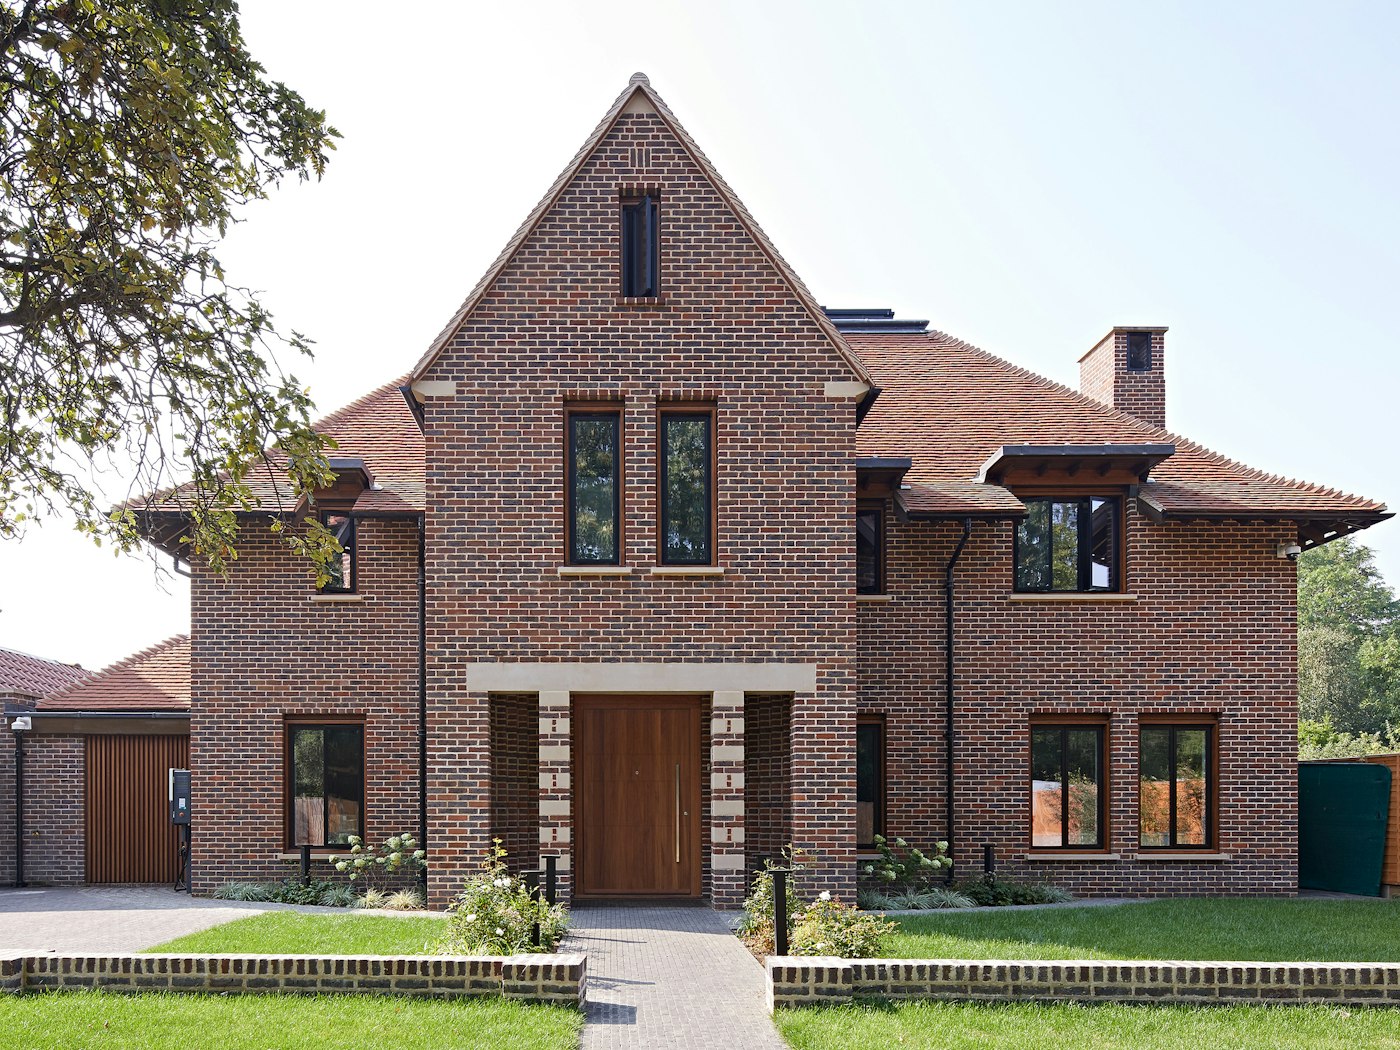 This more traditionally styled brick house has been given a contemporary update with our Quattro front door